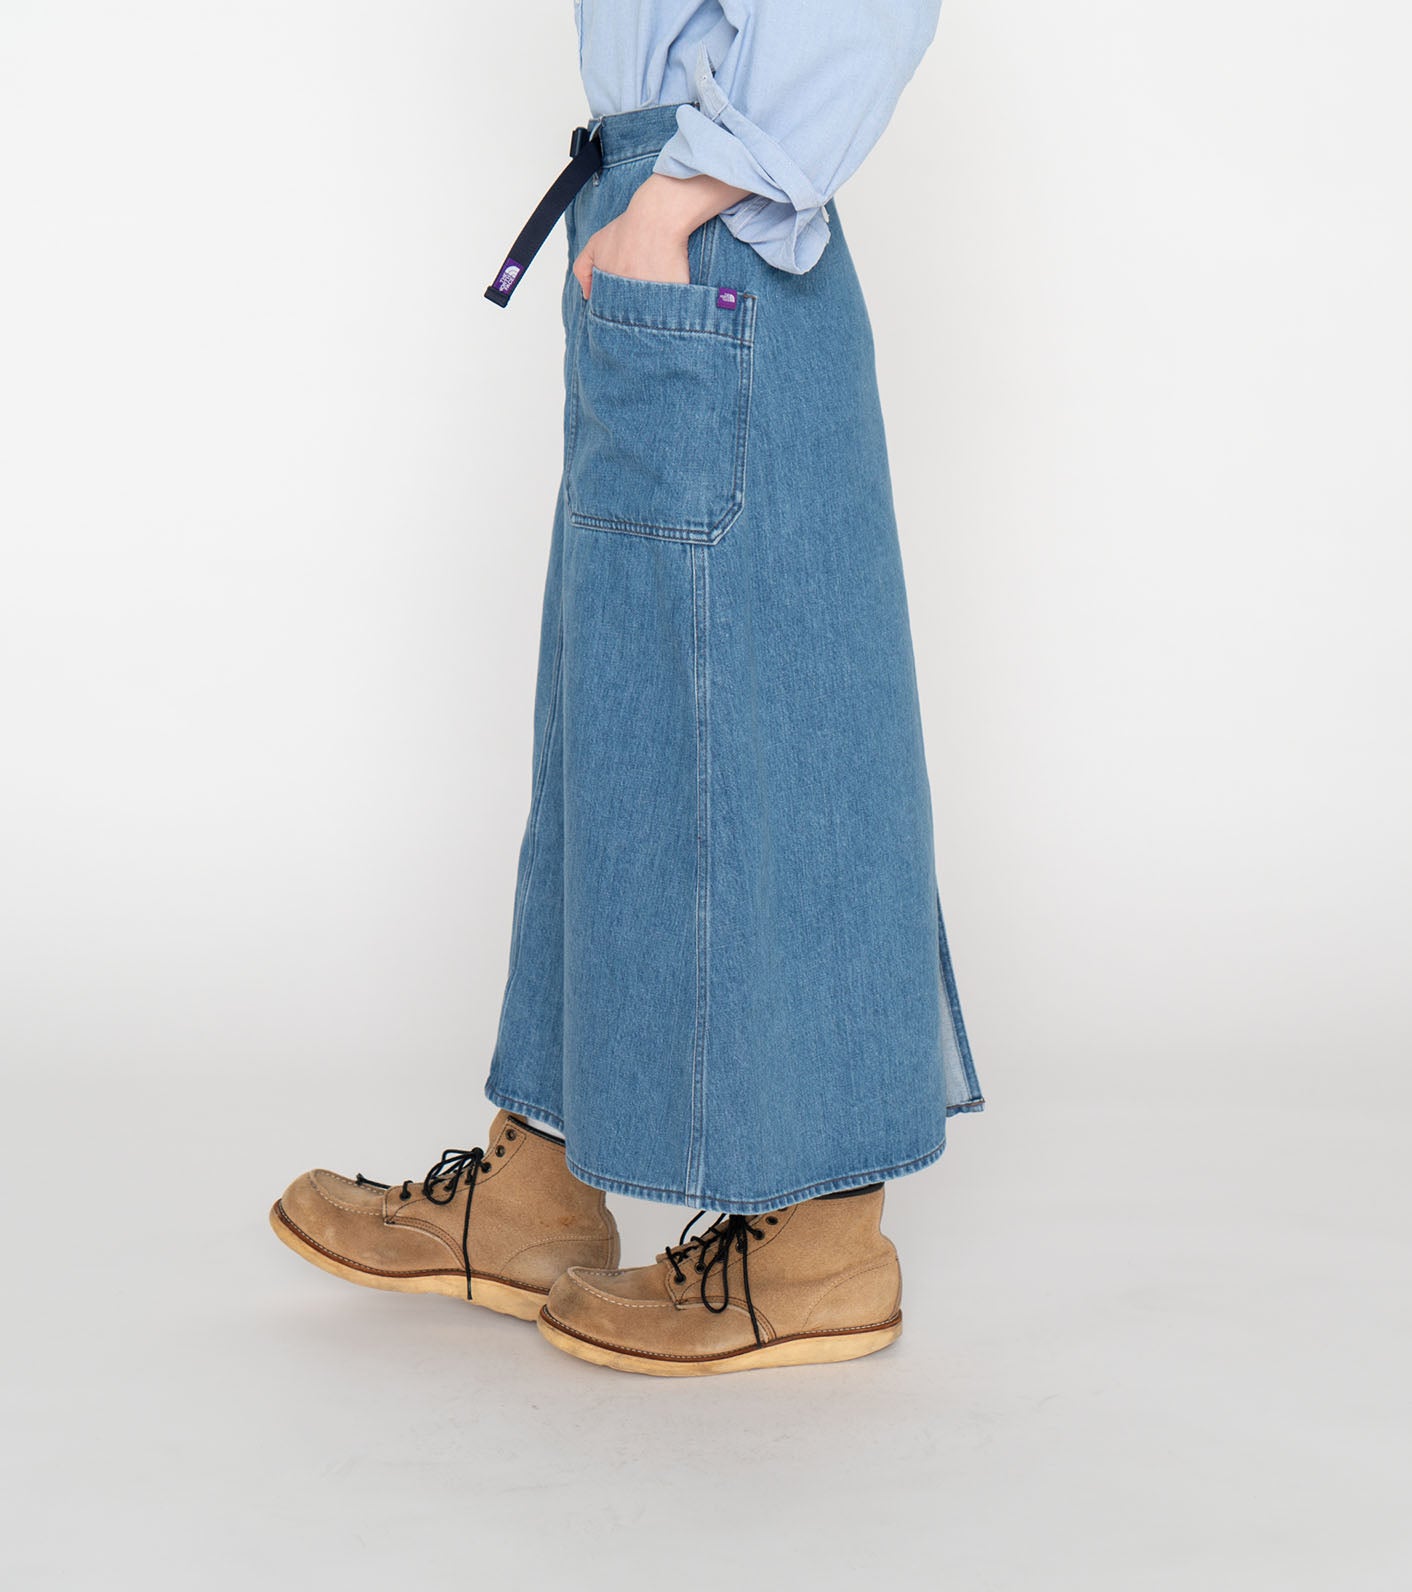 THE NORTH FACE PURPLE LABEL Denim Field Skirt – unexpected store